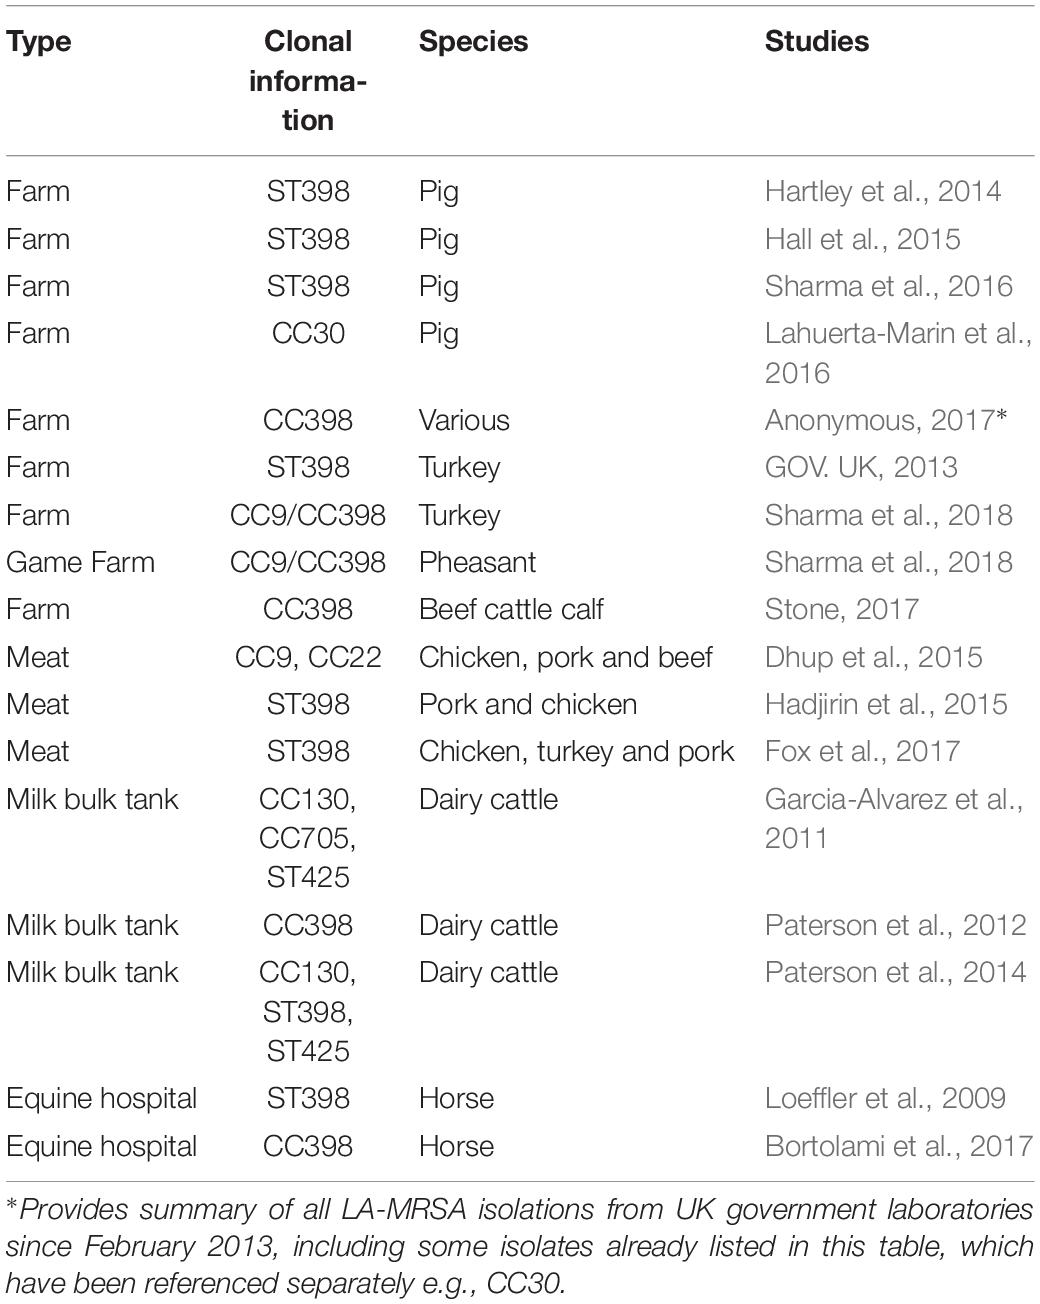 Frontiers | Livestock-Associated Methicillin-Resistant Staphylococcus  aureus From Animals and Animal Products in the UK